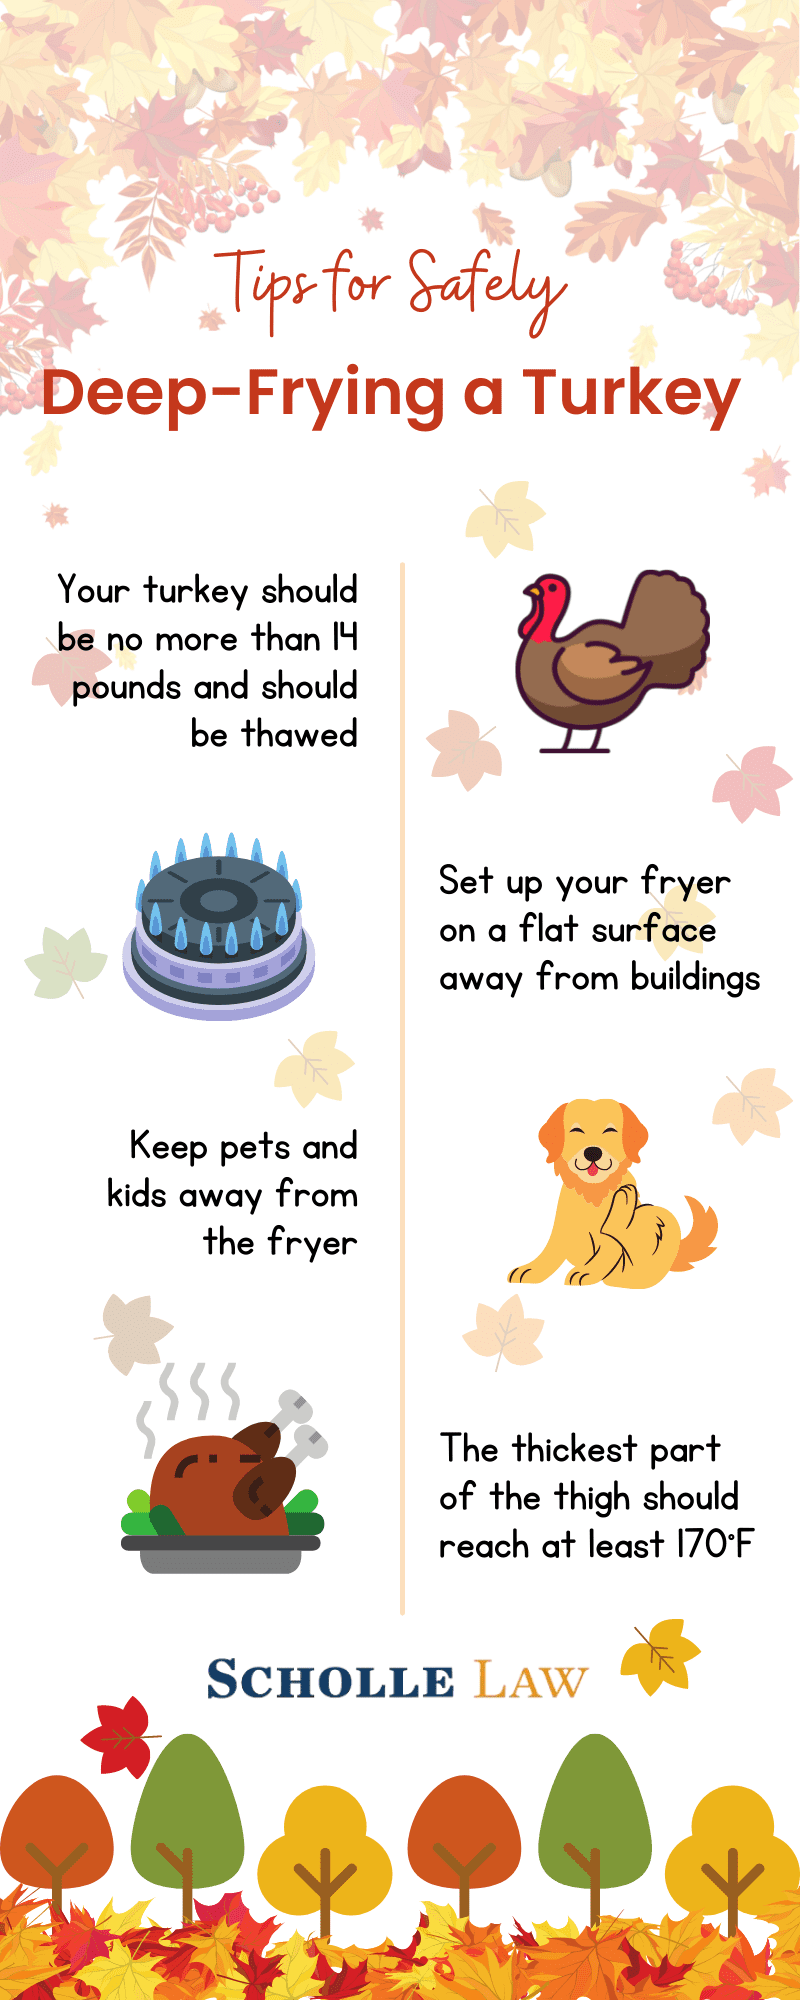 Infographic Tips for Safely Deep-Frying a Turkey